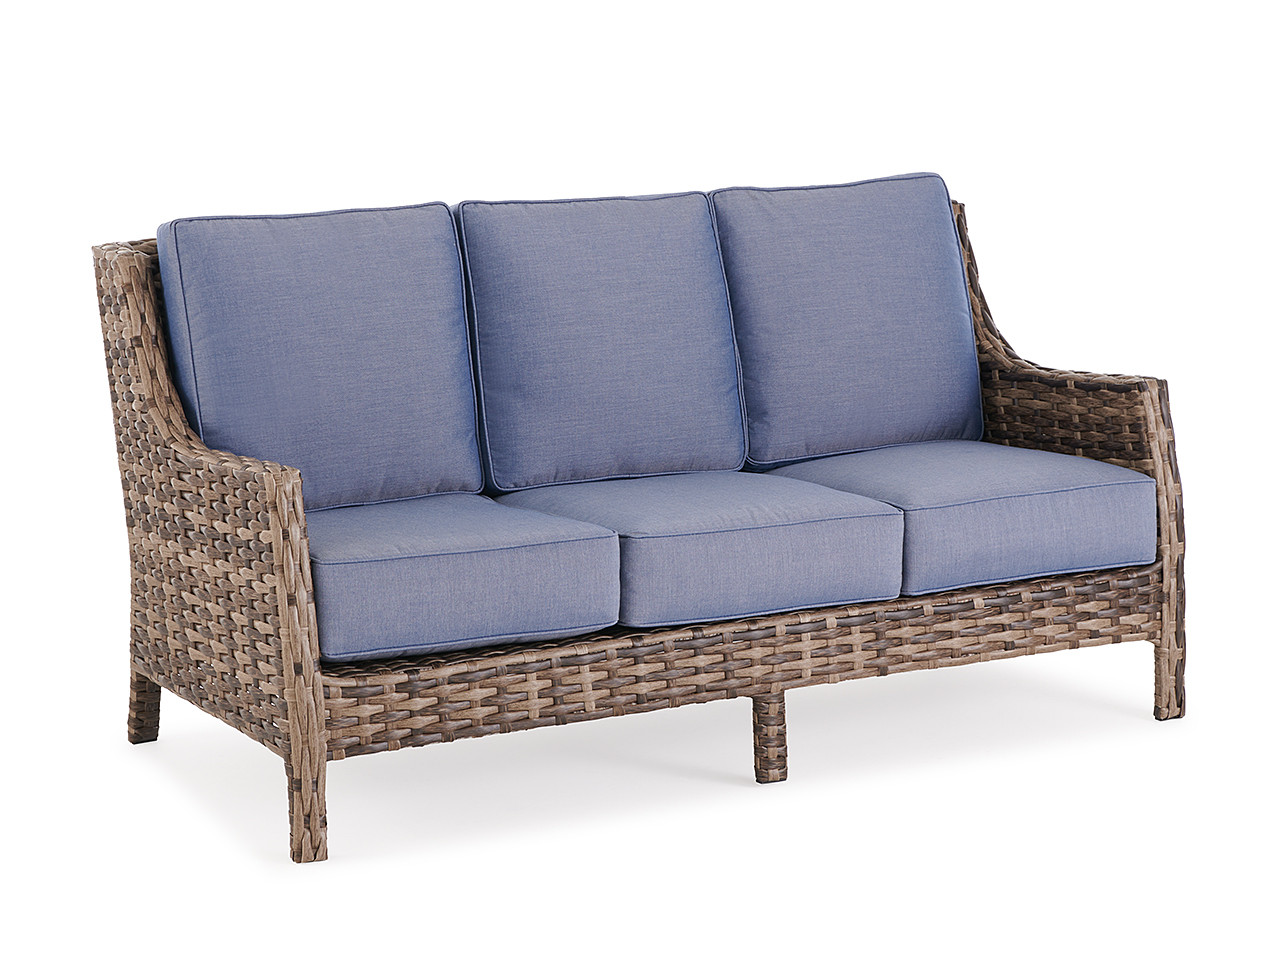 Cabo Caribou Outdoor Wicker and Remy Denim Cushion 3 Pc. Sofa Group with 40 x 28 in. Coffee Table